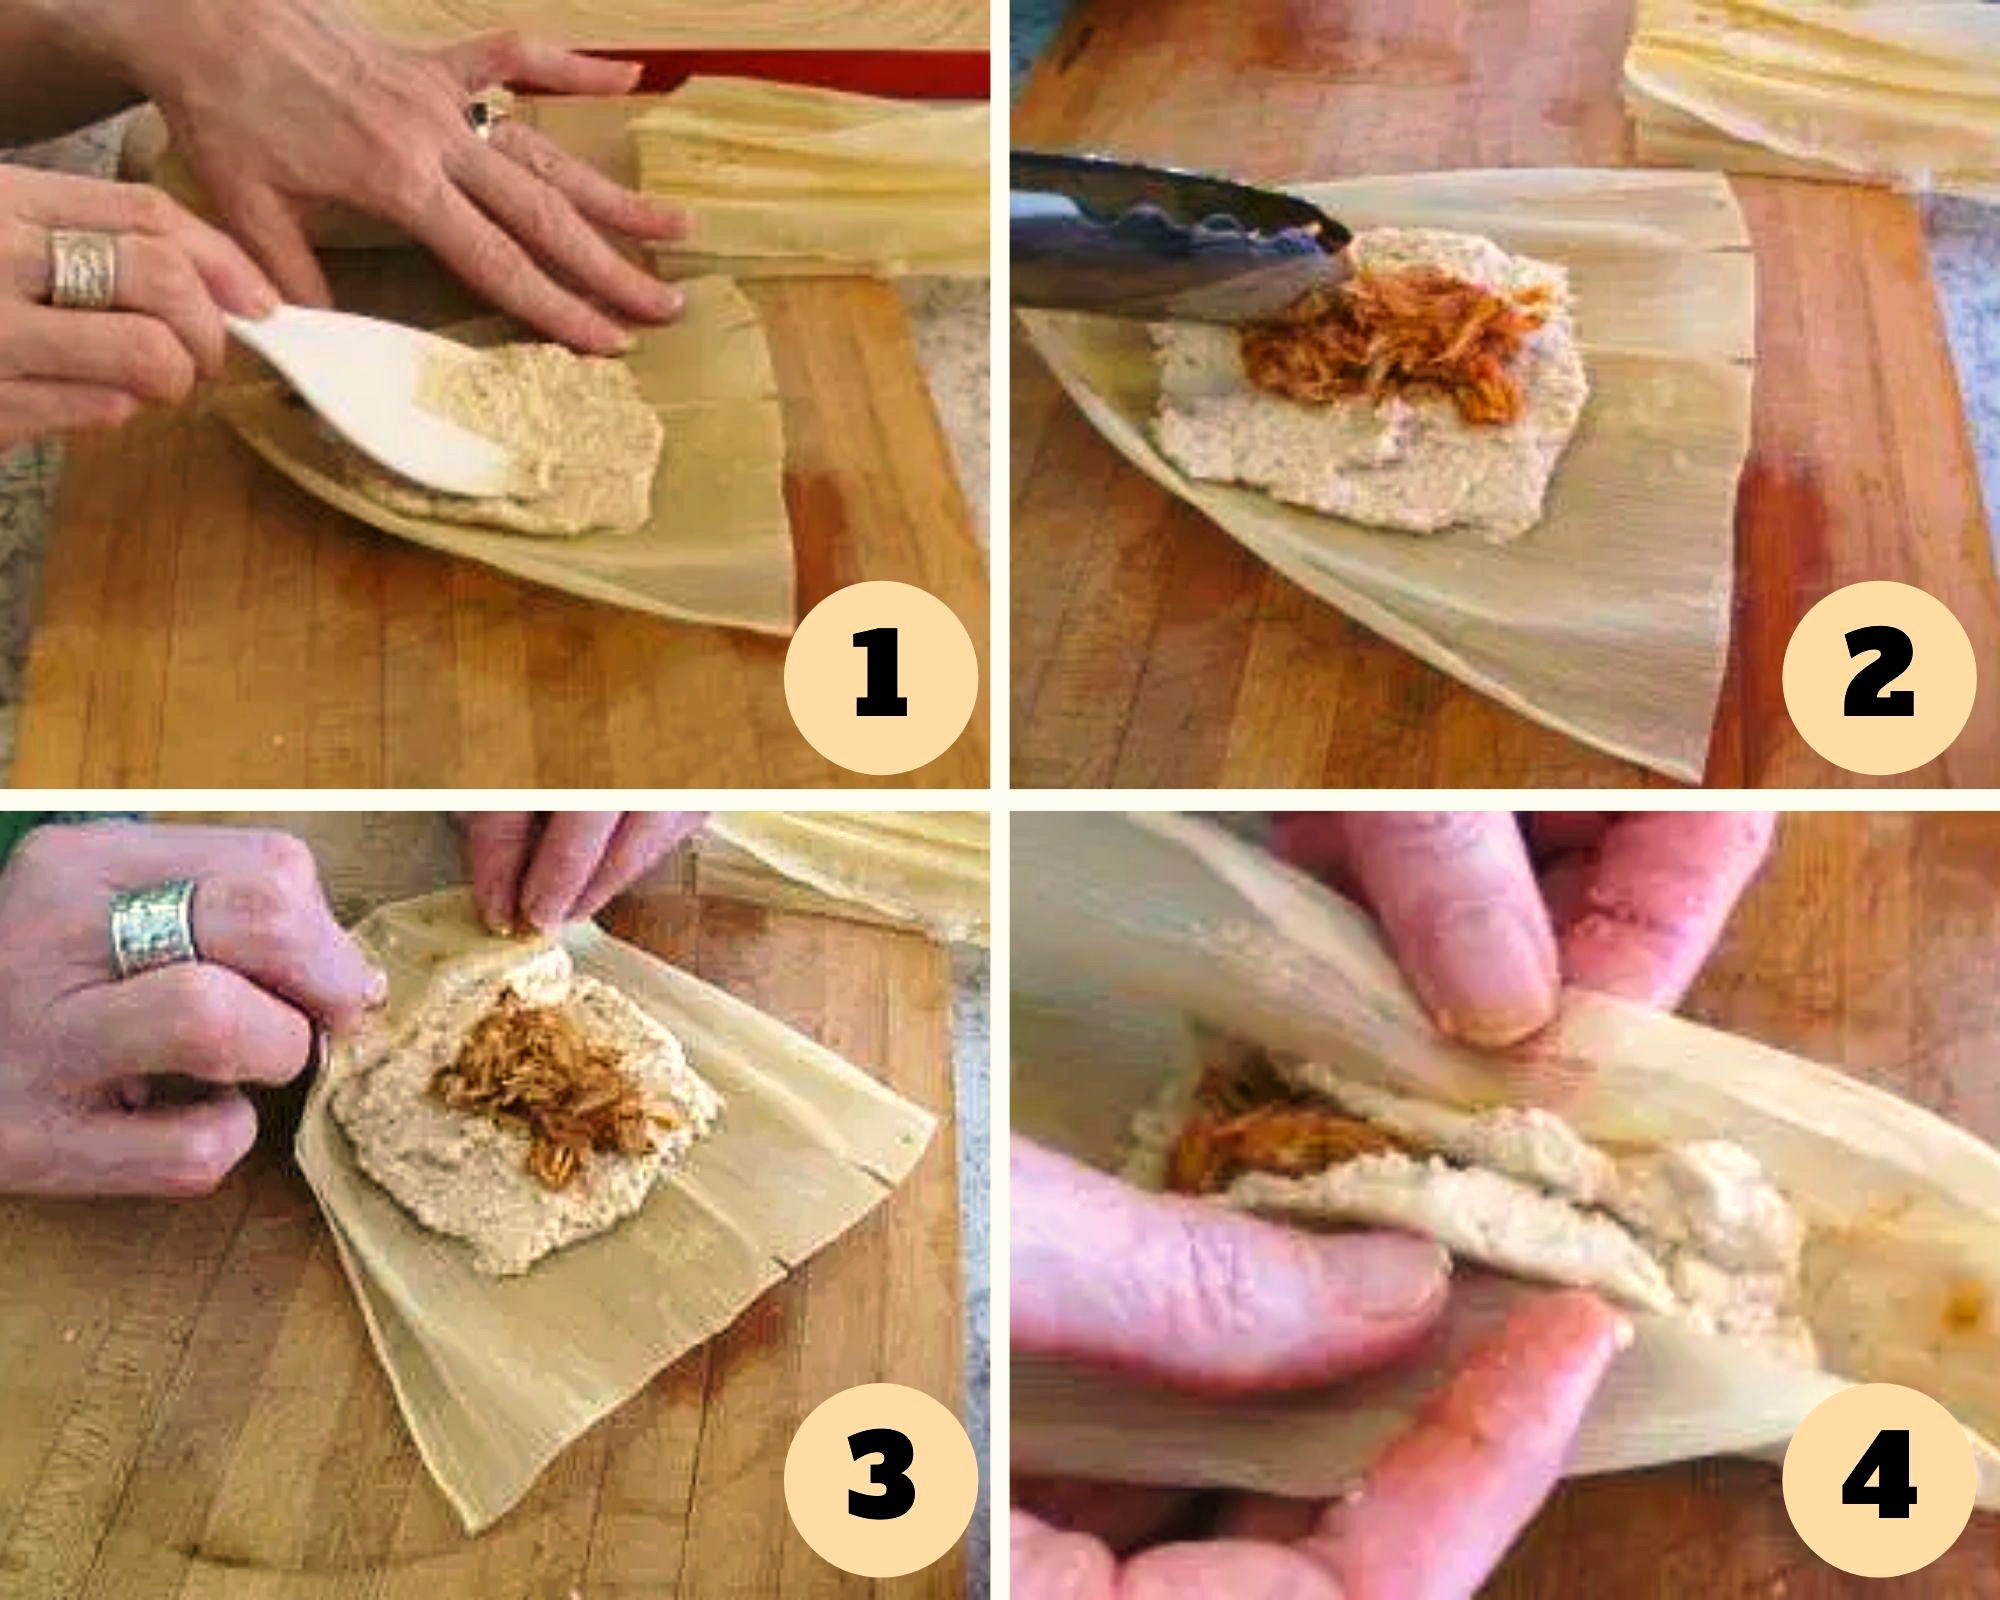 First 4 steps in tamales assembly.